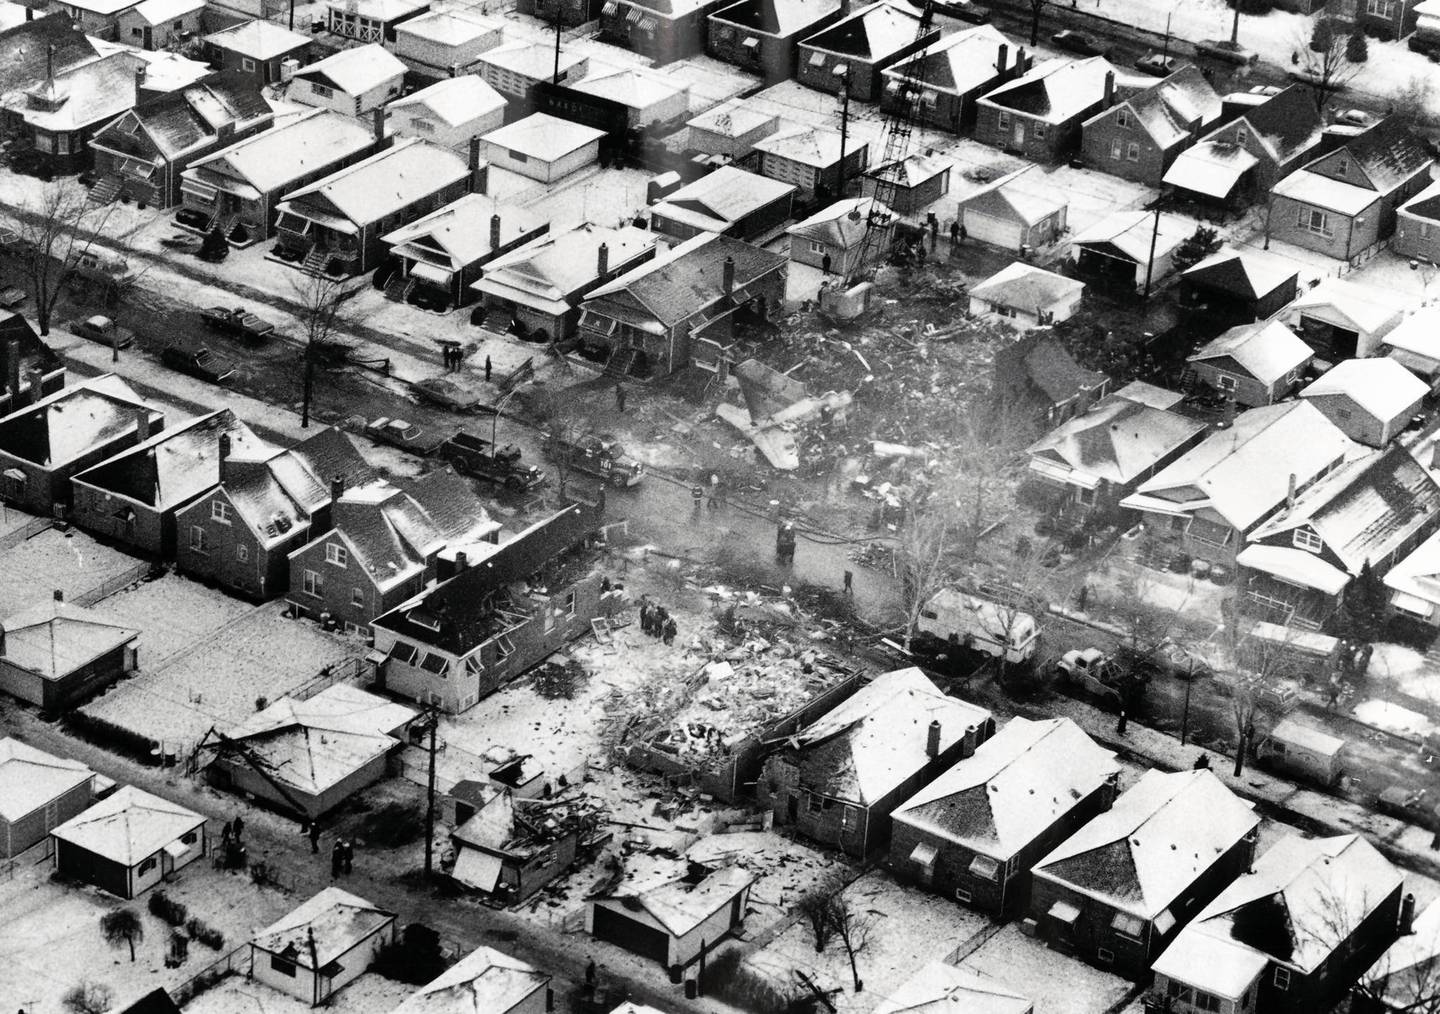 A photograph taken the day after the crash of United Airlines Flight 553 shows where the jetliner crashed into a row of bungalows on West 70th Place while approaching Midway Airport; 43 of the 61 persons aboard, and two in a home, were killed.